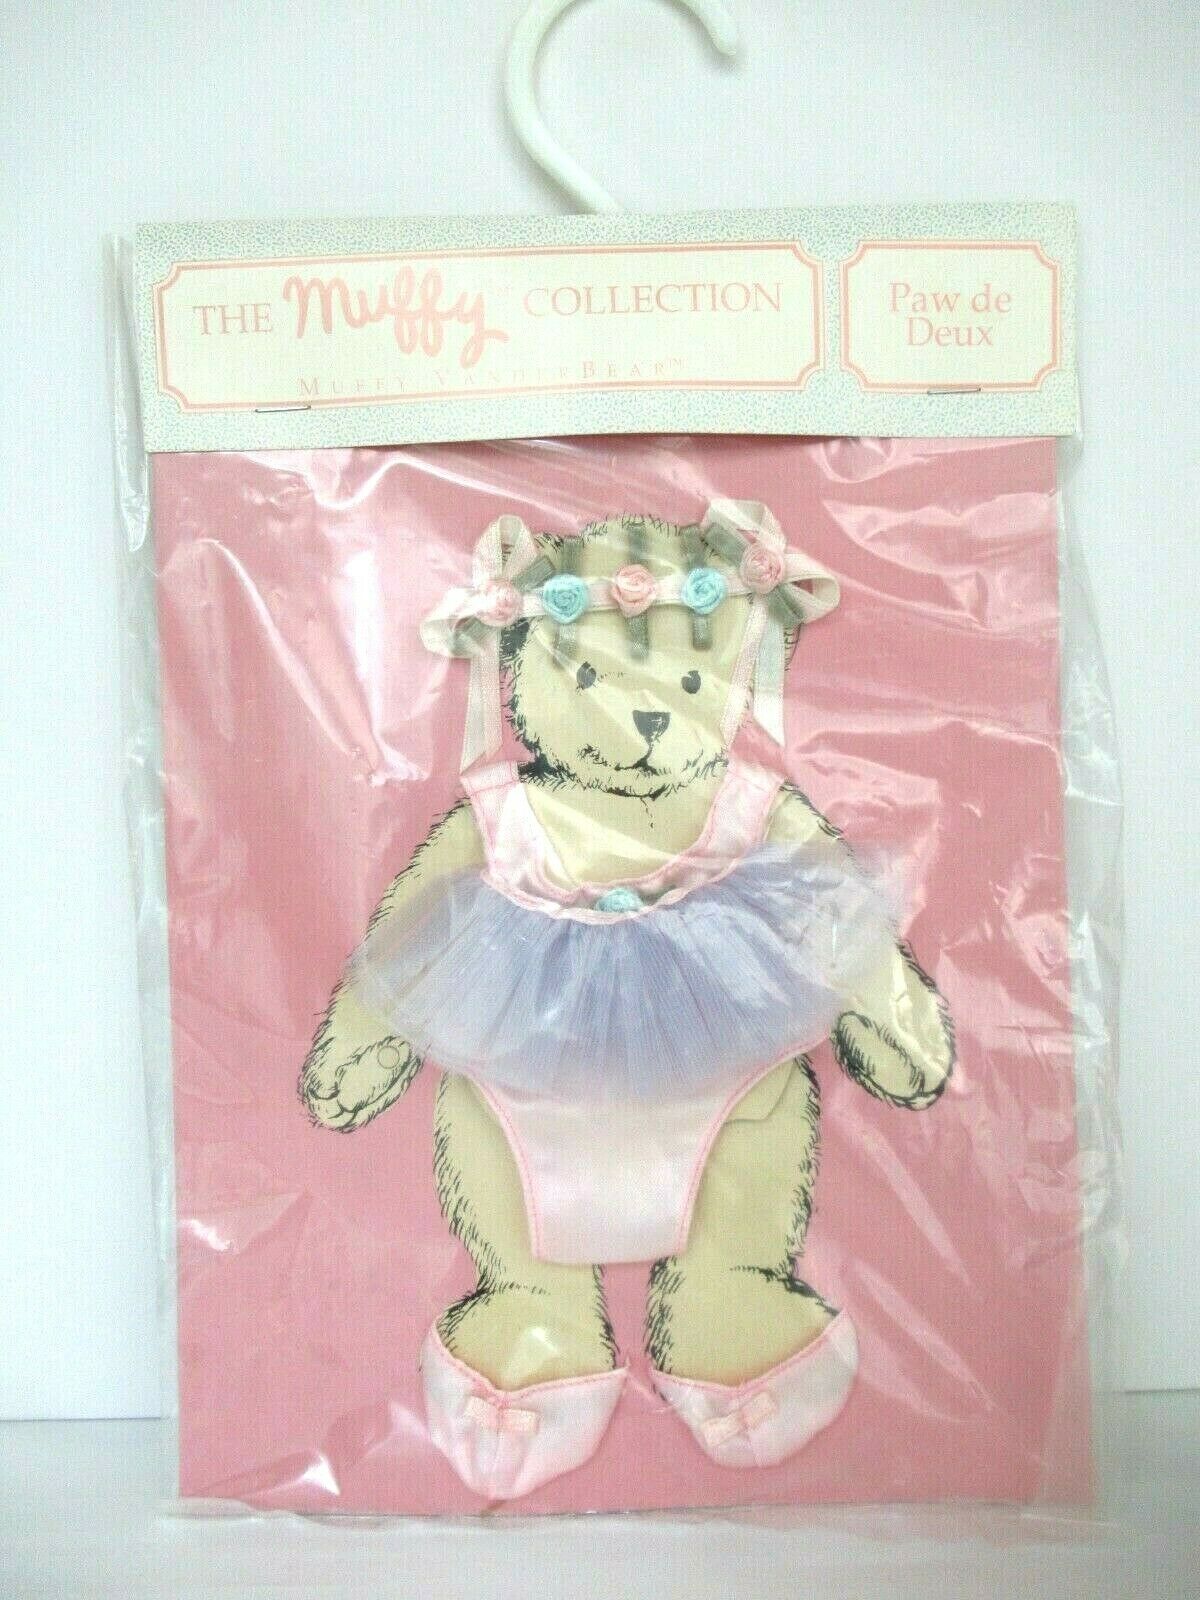 New Nabco Muffy Collection Vanderbear Paw De Deux Ballet Clothes Outfit 1990